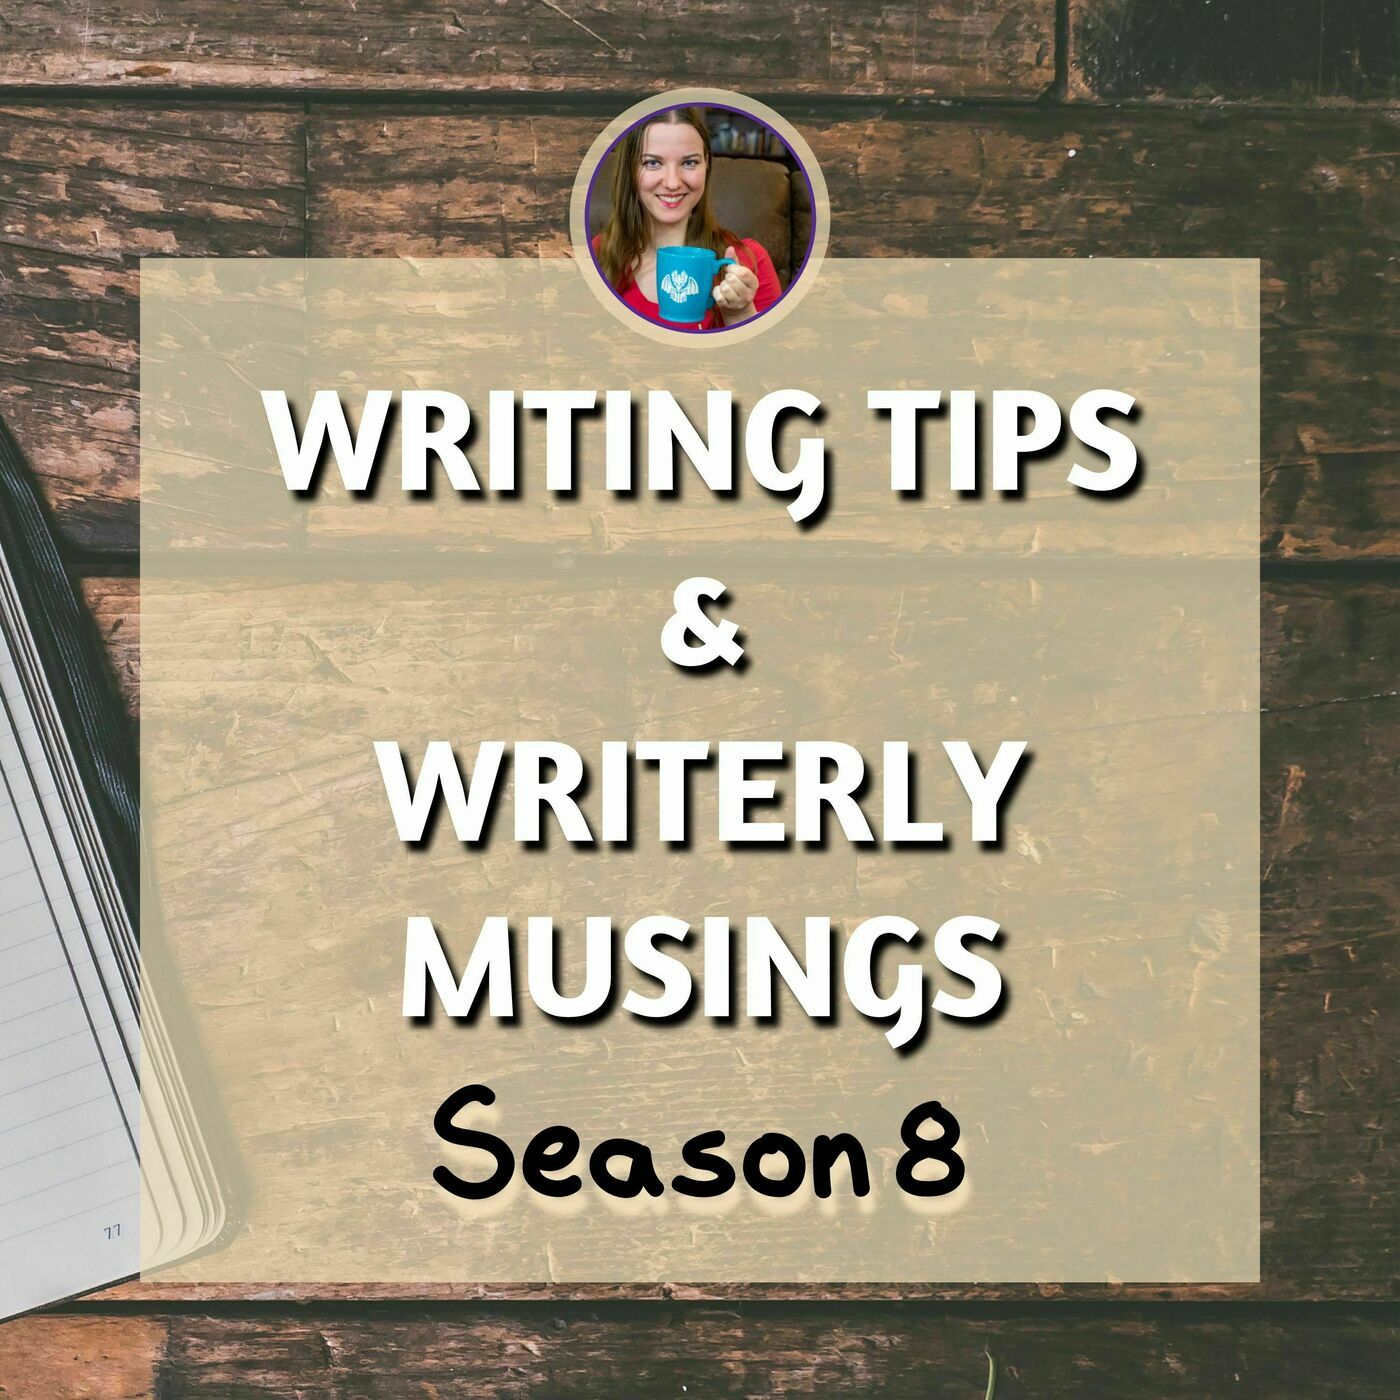 Writing Tips and Writerly Musings resolutions-2022: Morgan's 2022 Resolutions